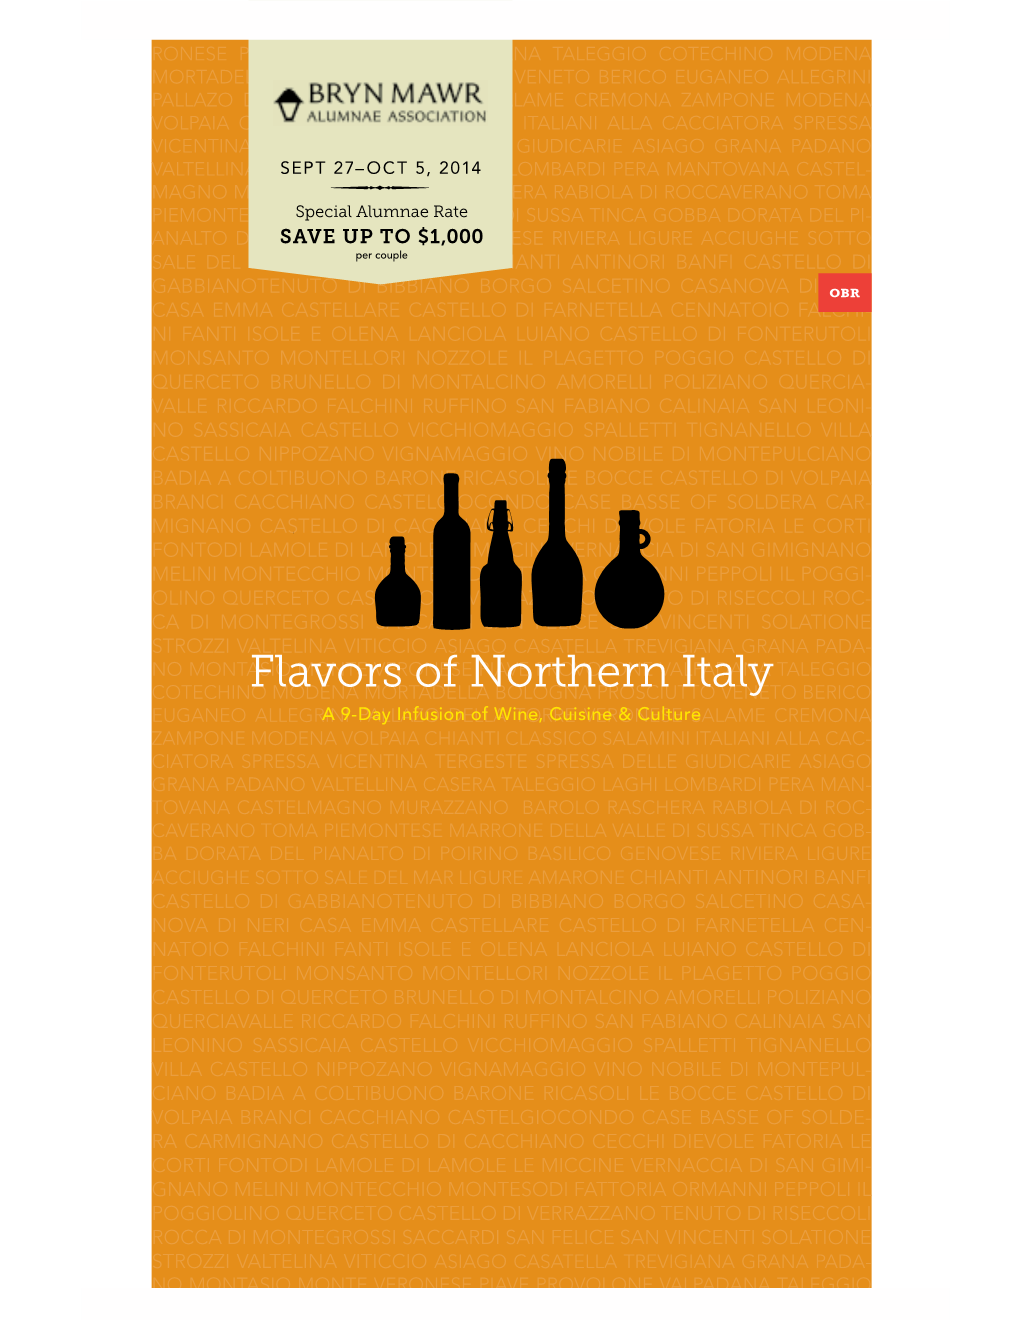 Flavors of Northern Italy SEPT 27–OCT 5, 2014 Venice Extension: Oc Tober 5 – 8, 2014